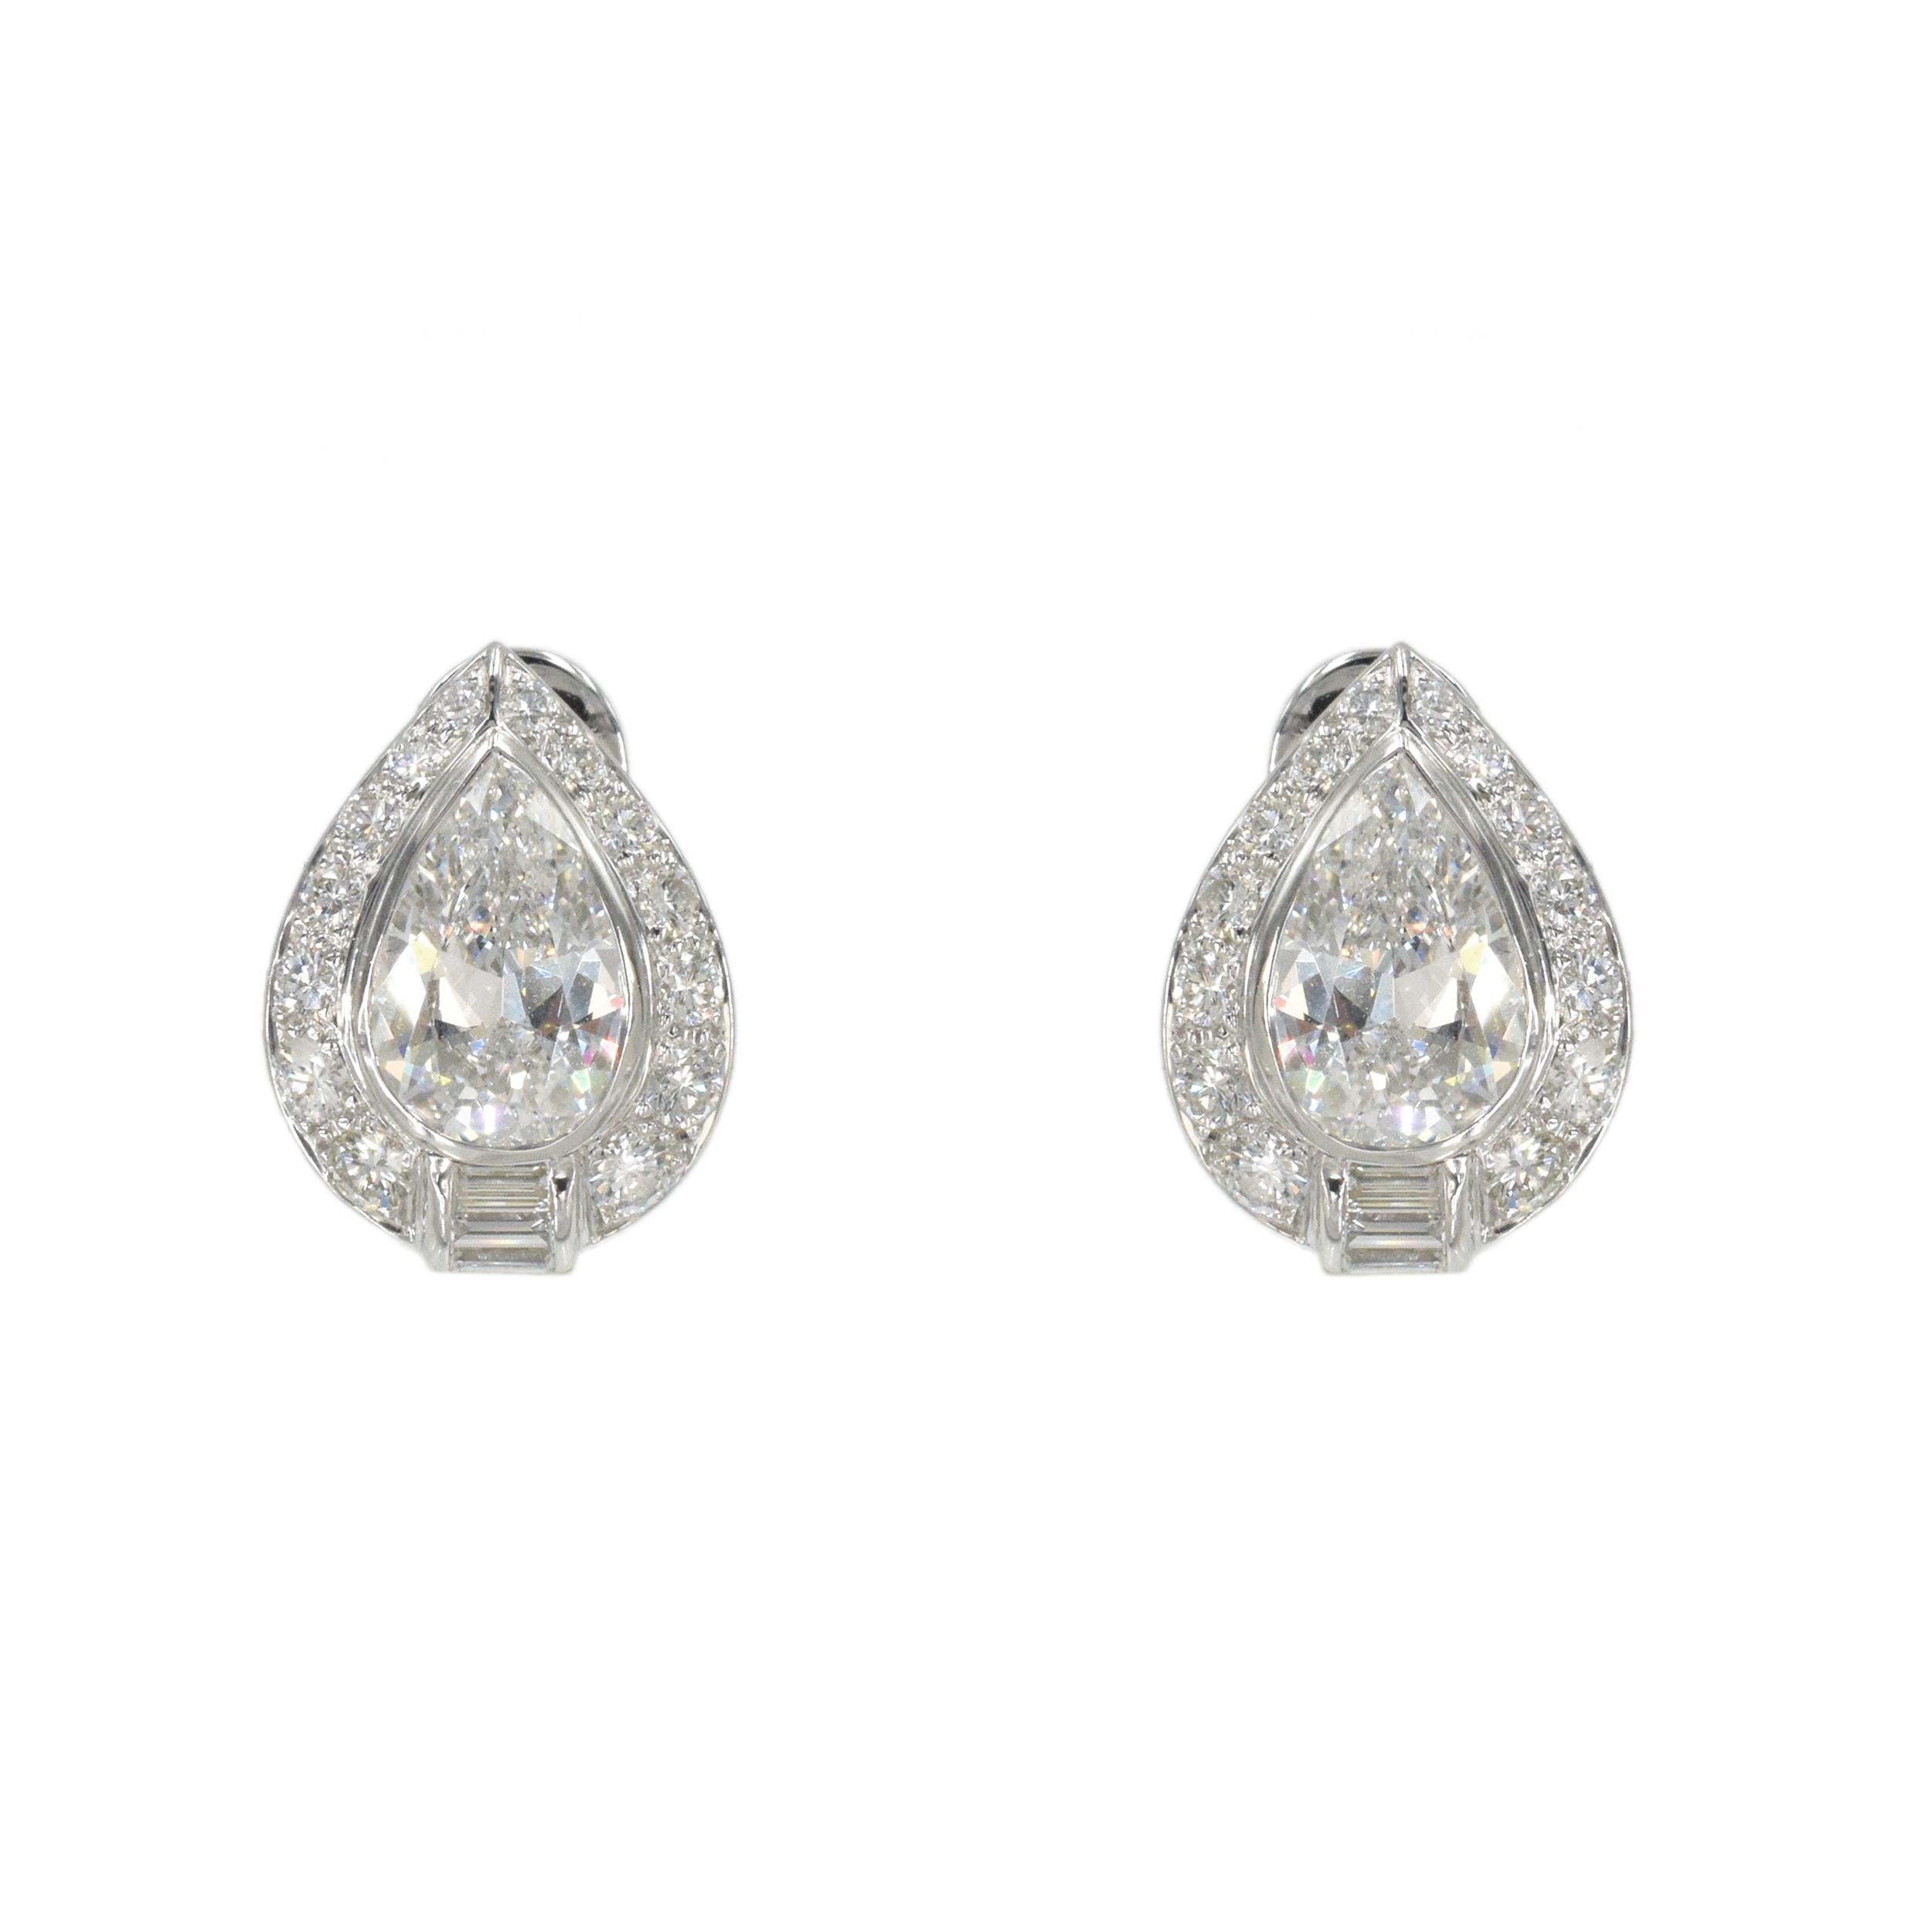 Diamond and Platinum Earrings, Bulgari This pair of earrings has 2 pear shape center
diamonds weighing a total of 2.70 carats (1.36 carat, Color: E, Clarity: VS1, GIA#1216316941 and
1.34carat Color: E, Clarity: VS1, GIA#2211316939) surrounded by